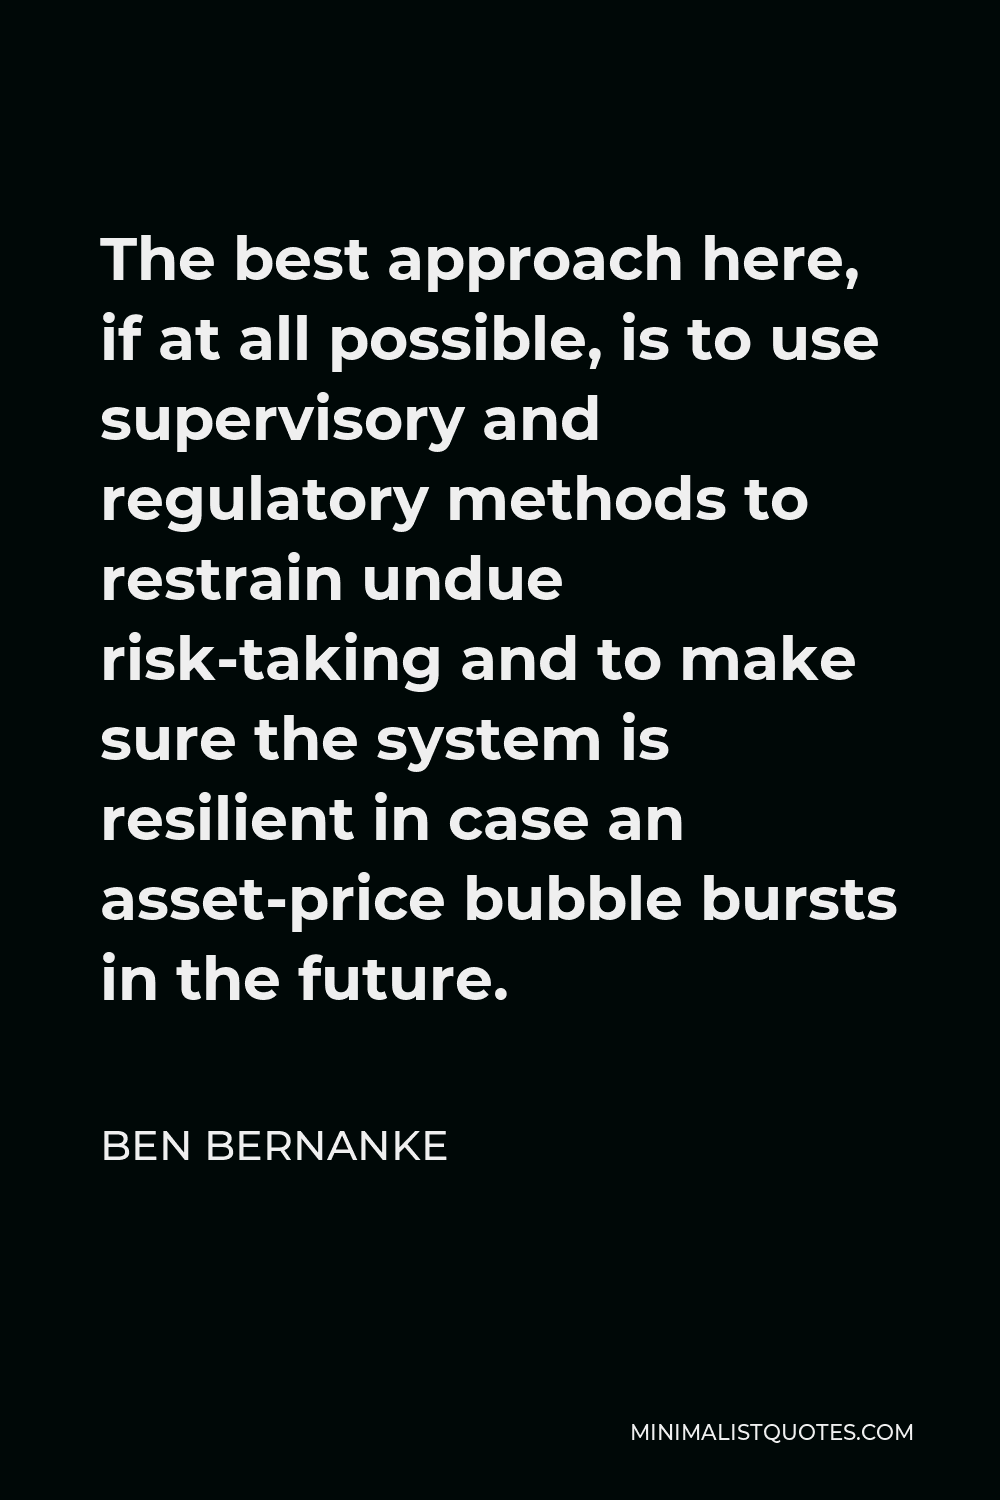 Ben Bernanke Quote - The best approach here, if at all possible, is to use supervisory and regulatory methods to restrain undue risk-taking and to make sure the system is resilient in case an asset-price bubble bursts in the future.